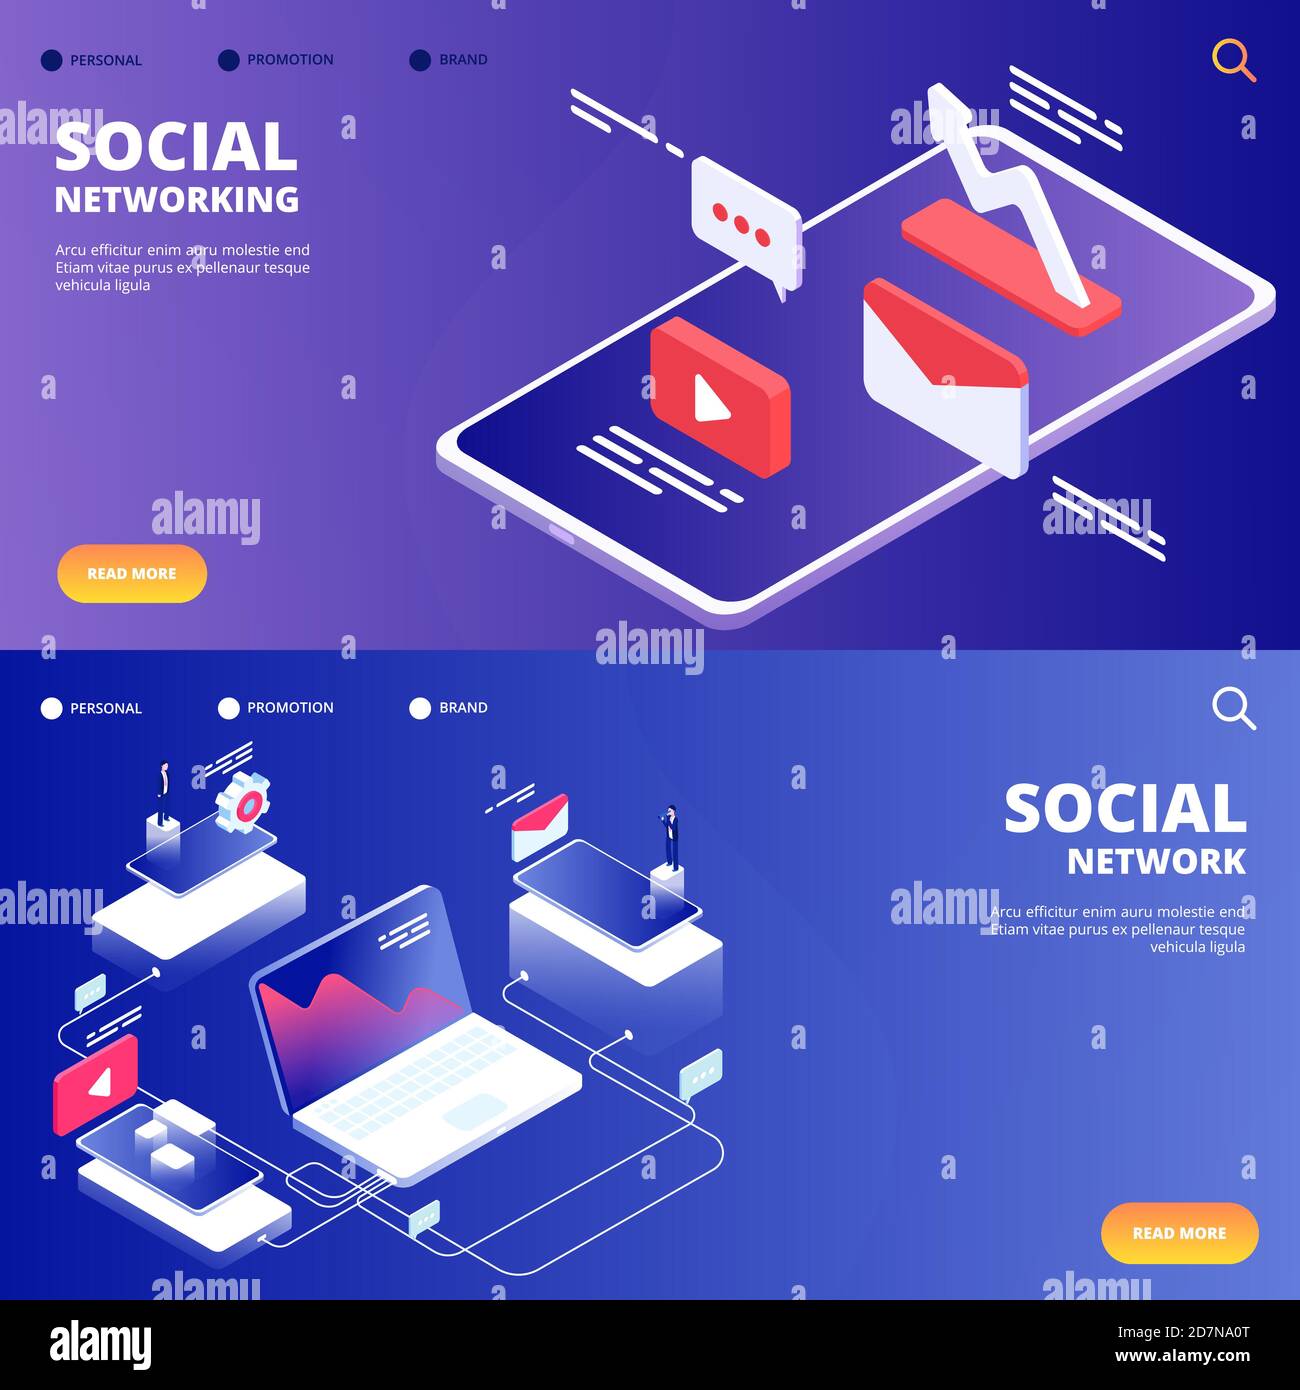 Social network and networking vector landing pages. Illustration of mobile social network Stock Vector